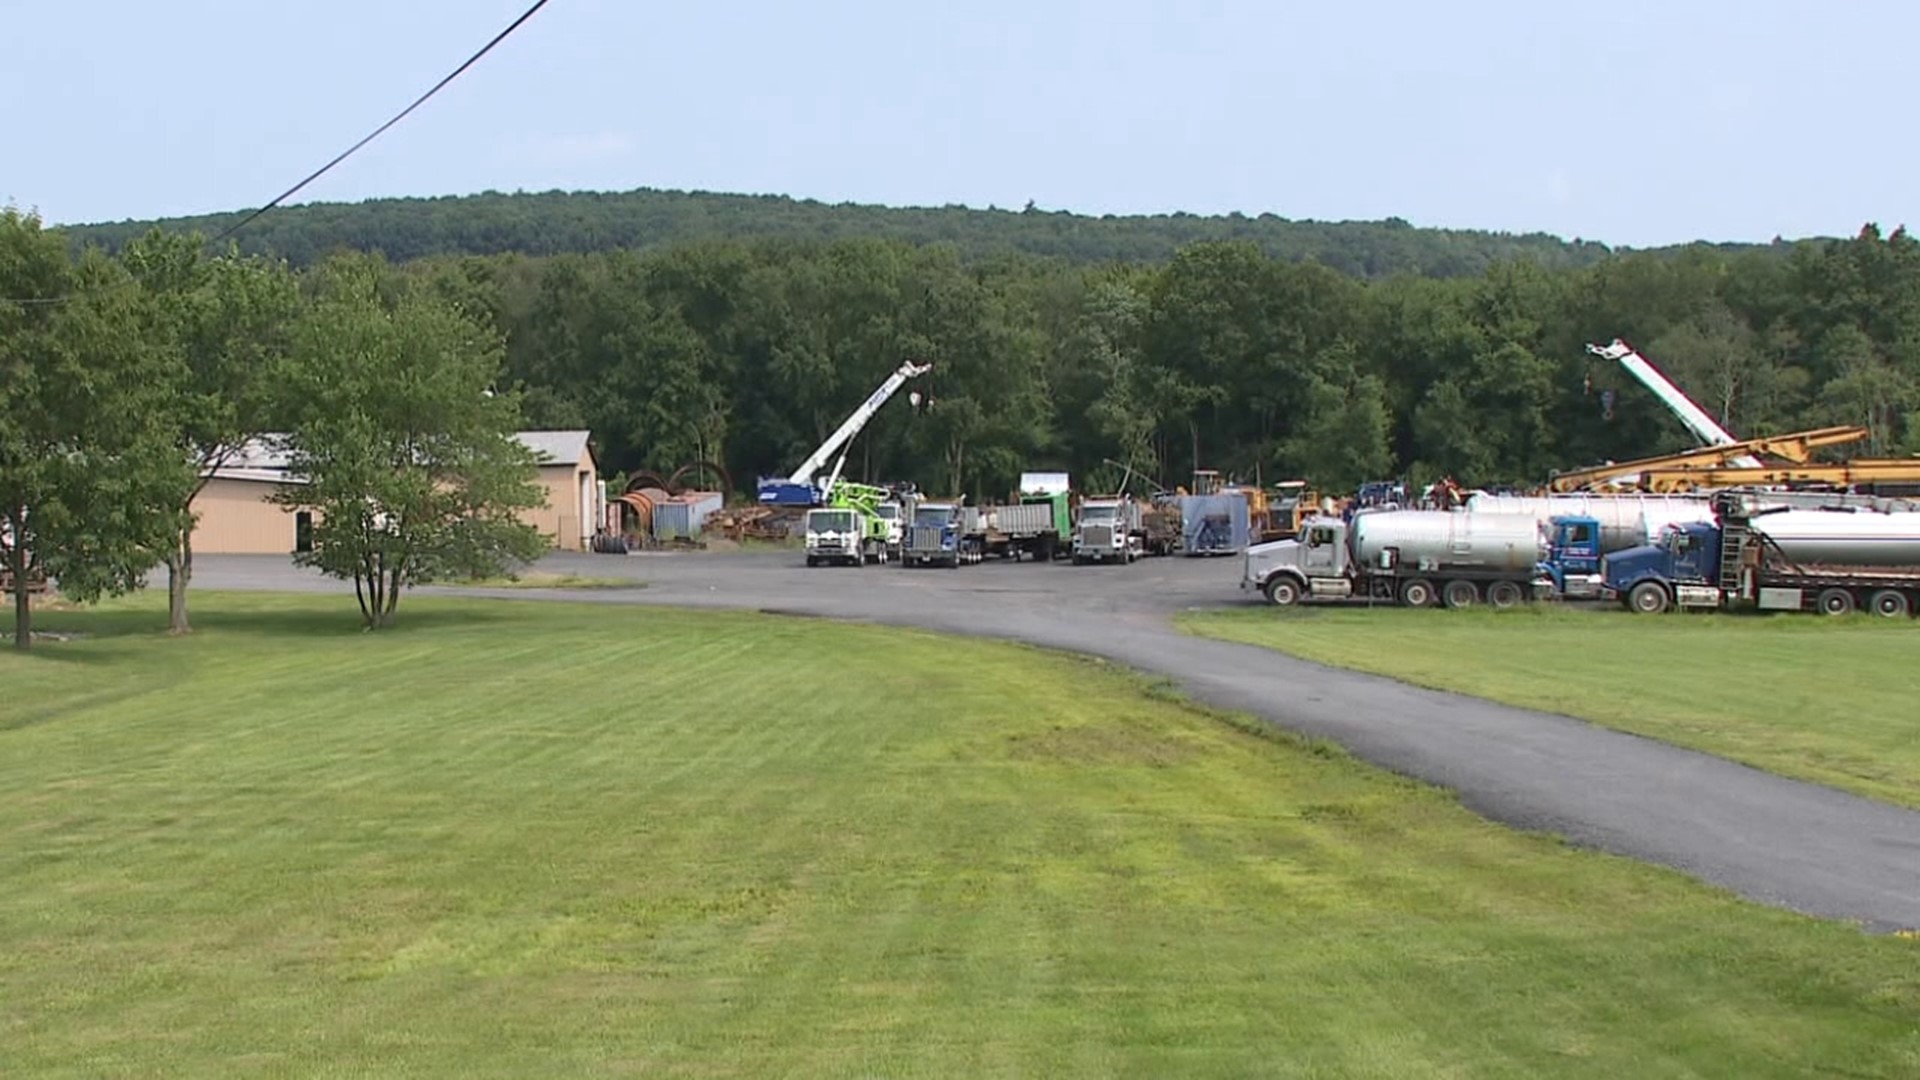 Police say a Schuylkill County man died after another man hit and killed him with a tri-axle dump truck.